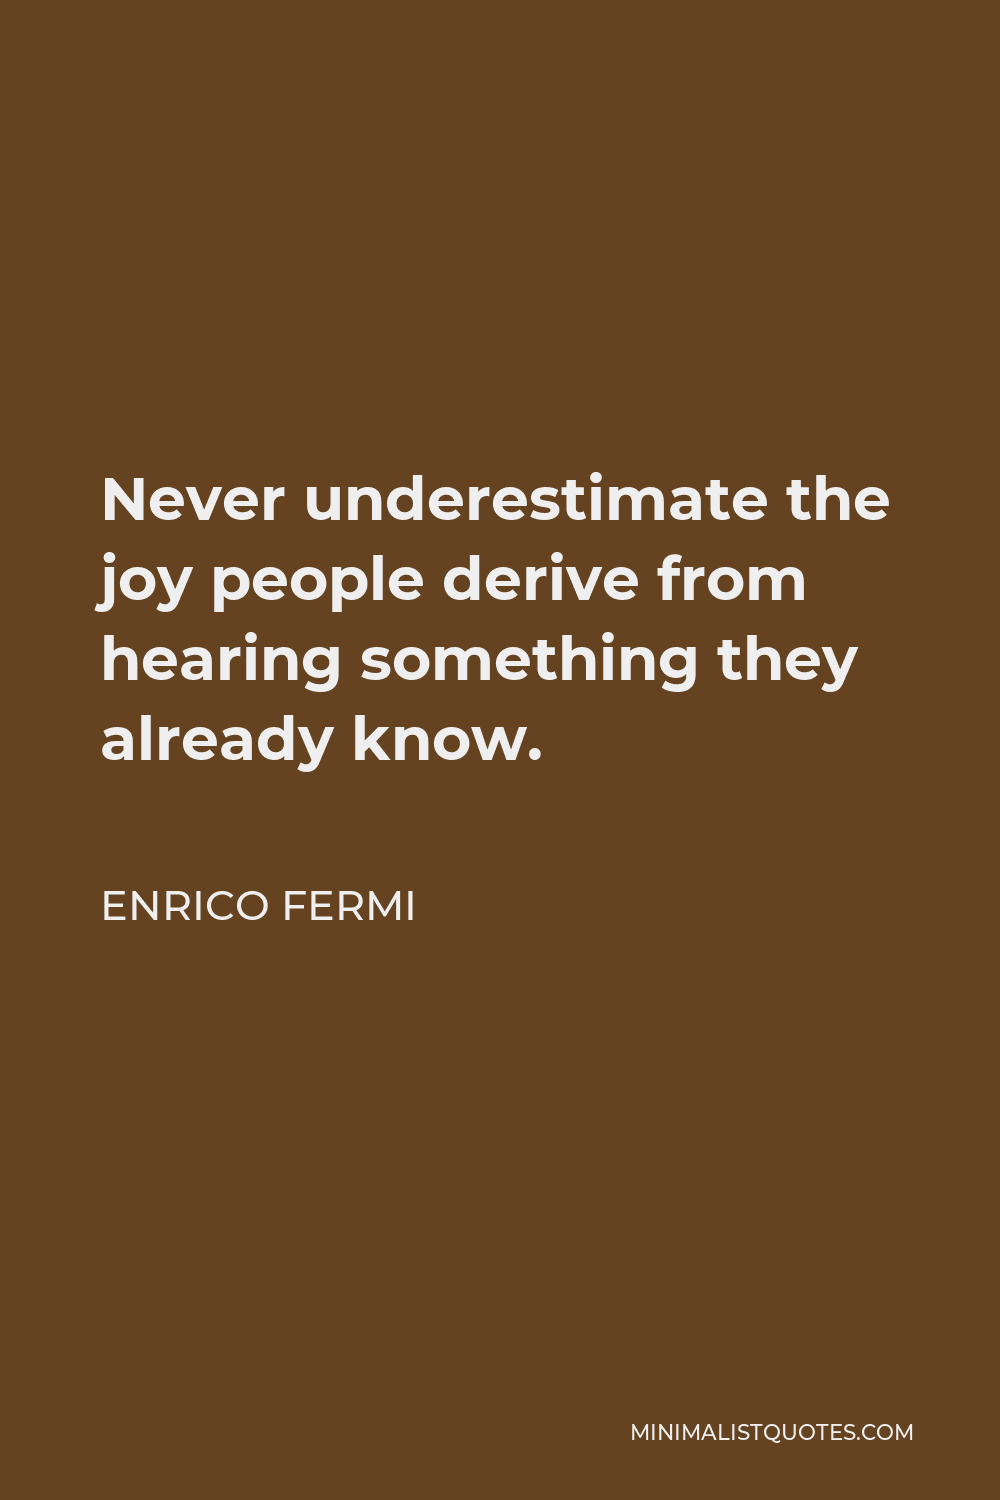 Enrico Fermi Quote - Never underestimate the joy people derive from hearing something they already know.